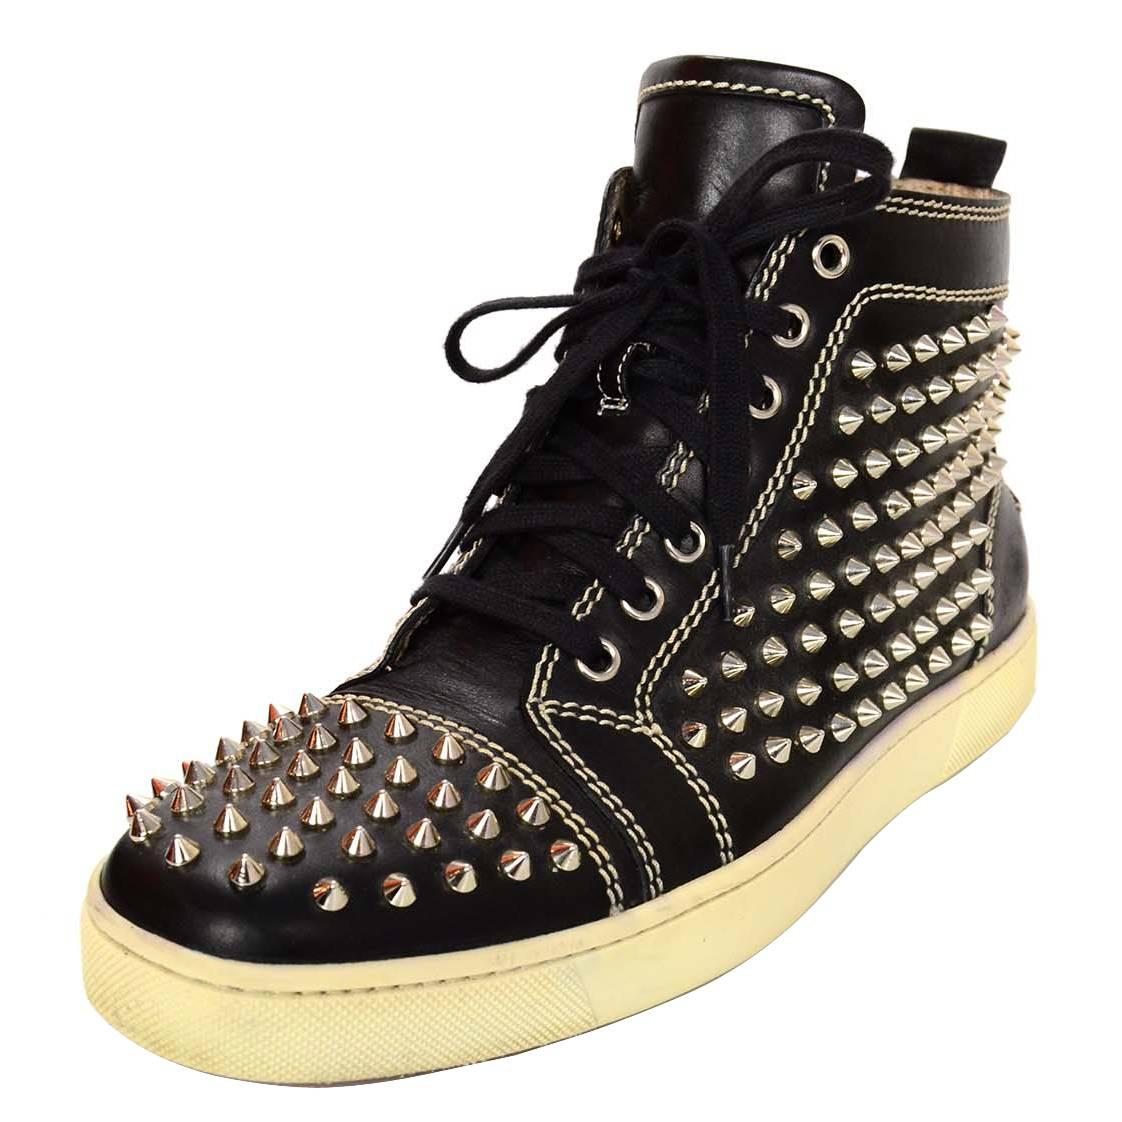 Christian Louboutin Black Leather Louis Spike High-top Studded Sneakers Sz 41